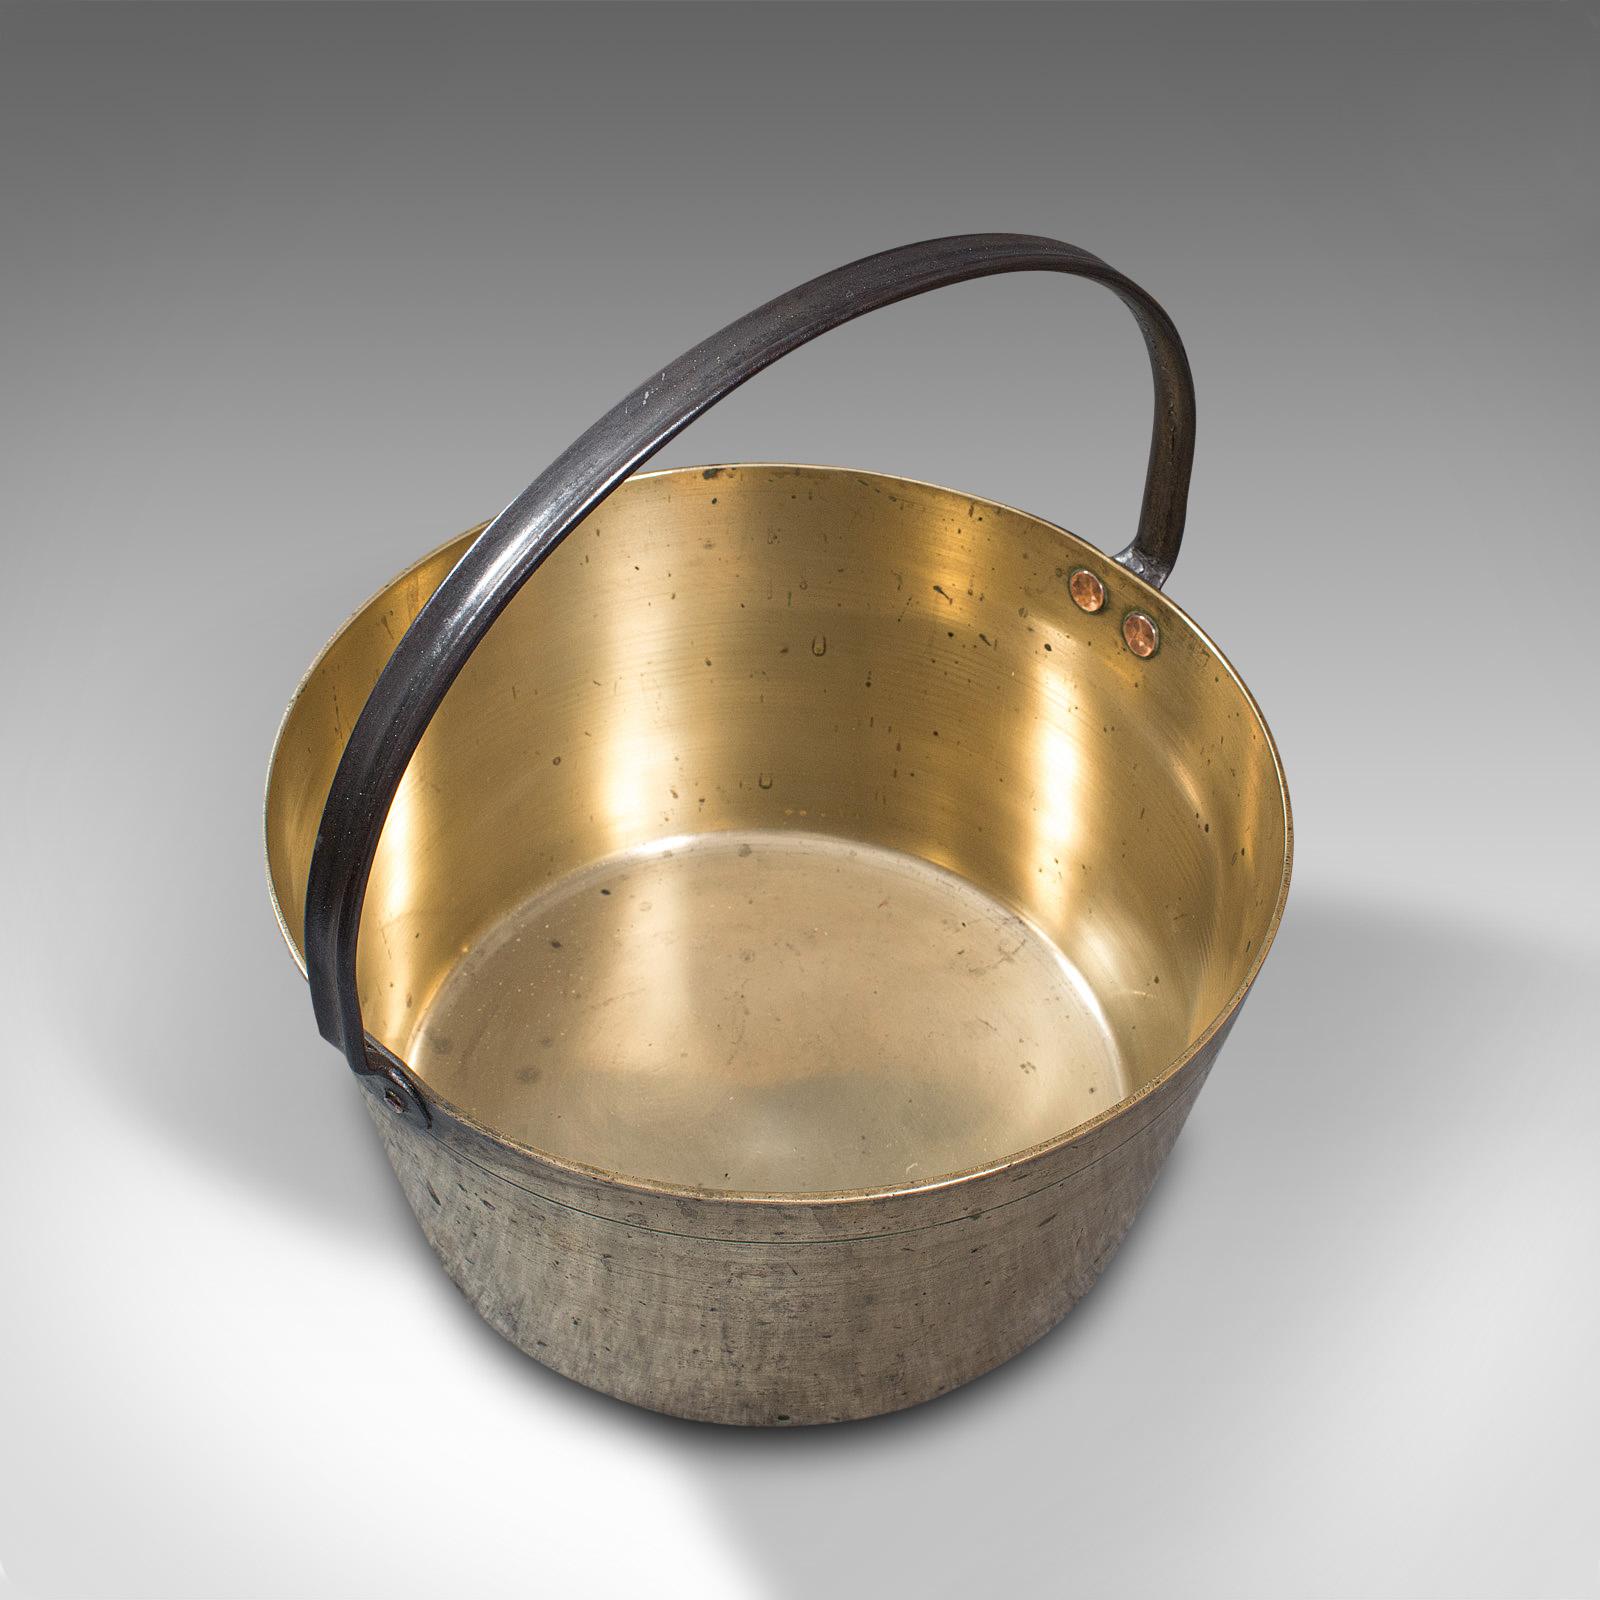 Antique Preserving Pan, English, Heavy Brass, Jam, Cooking Pot, Georgian, C 1800 In Good Condition For Sale In Hele, Devon, GB